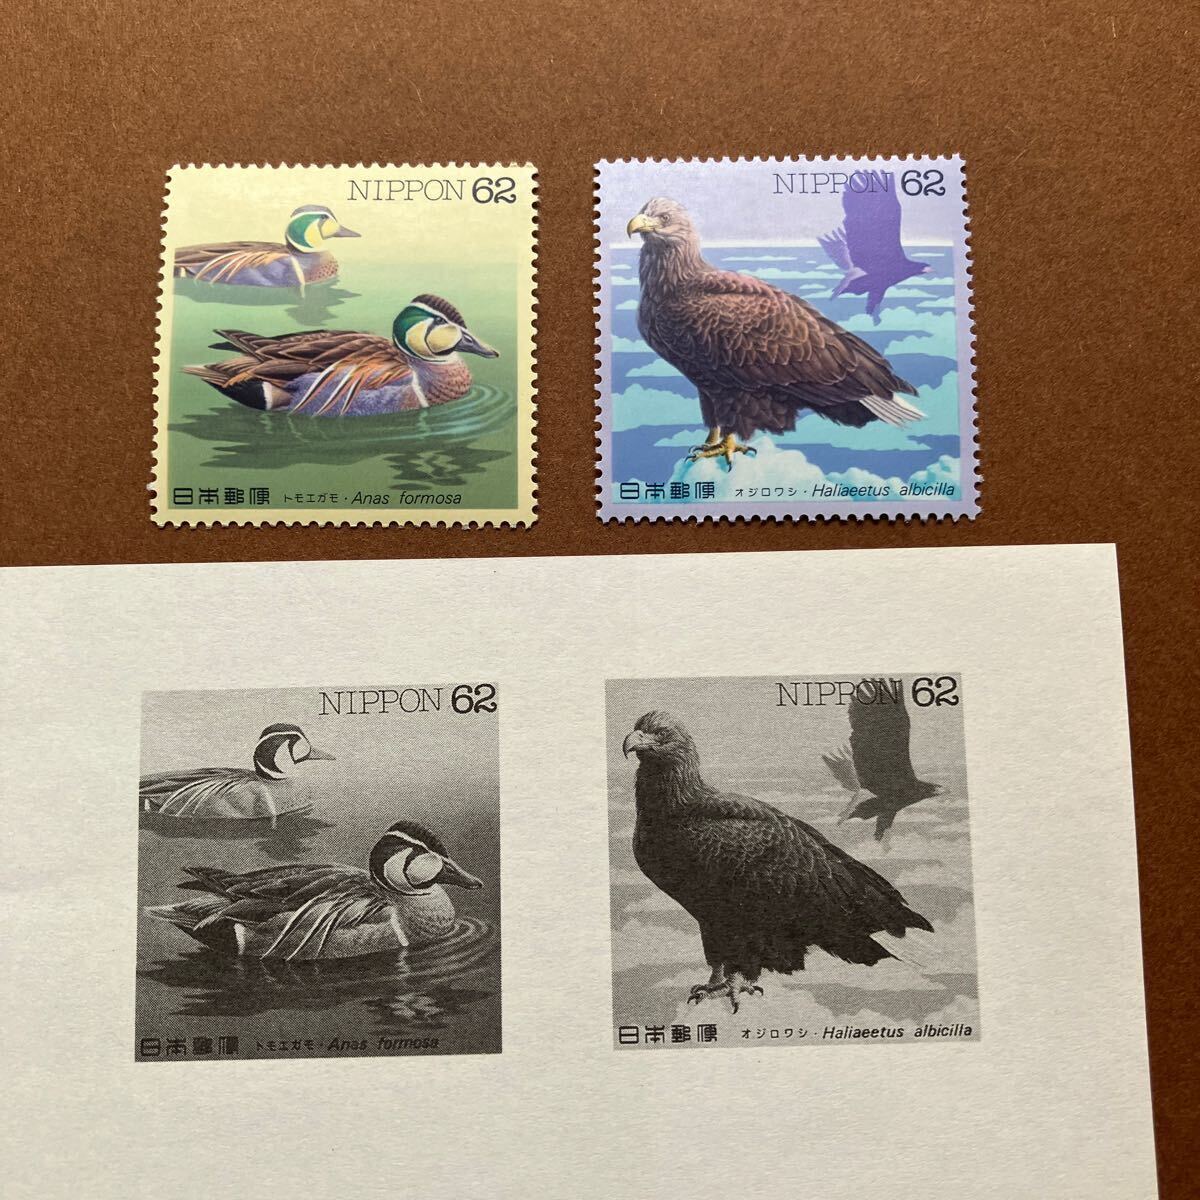  waterside bird series no. 8 compilation mail stamp /1993 year issue /62 jpy stamp / single one-side summarize /tomoegamo/oji lower si/ pamphlet ( instructions manual ) attaching / unused / wild bird 